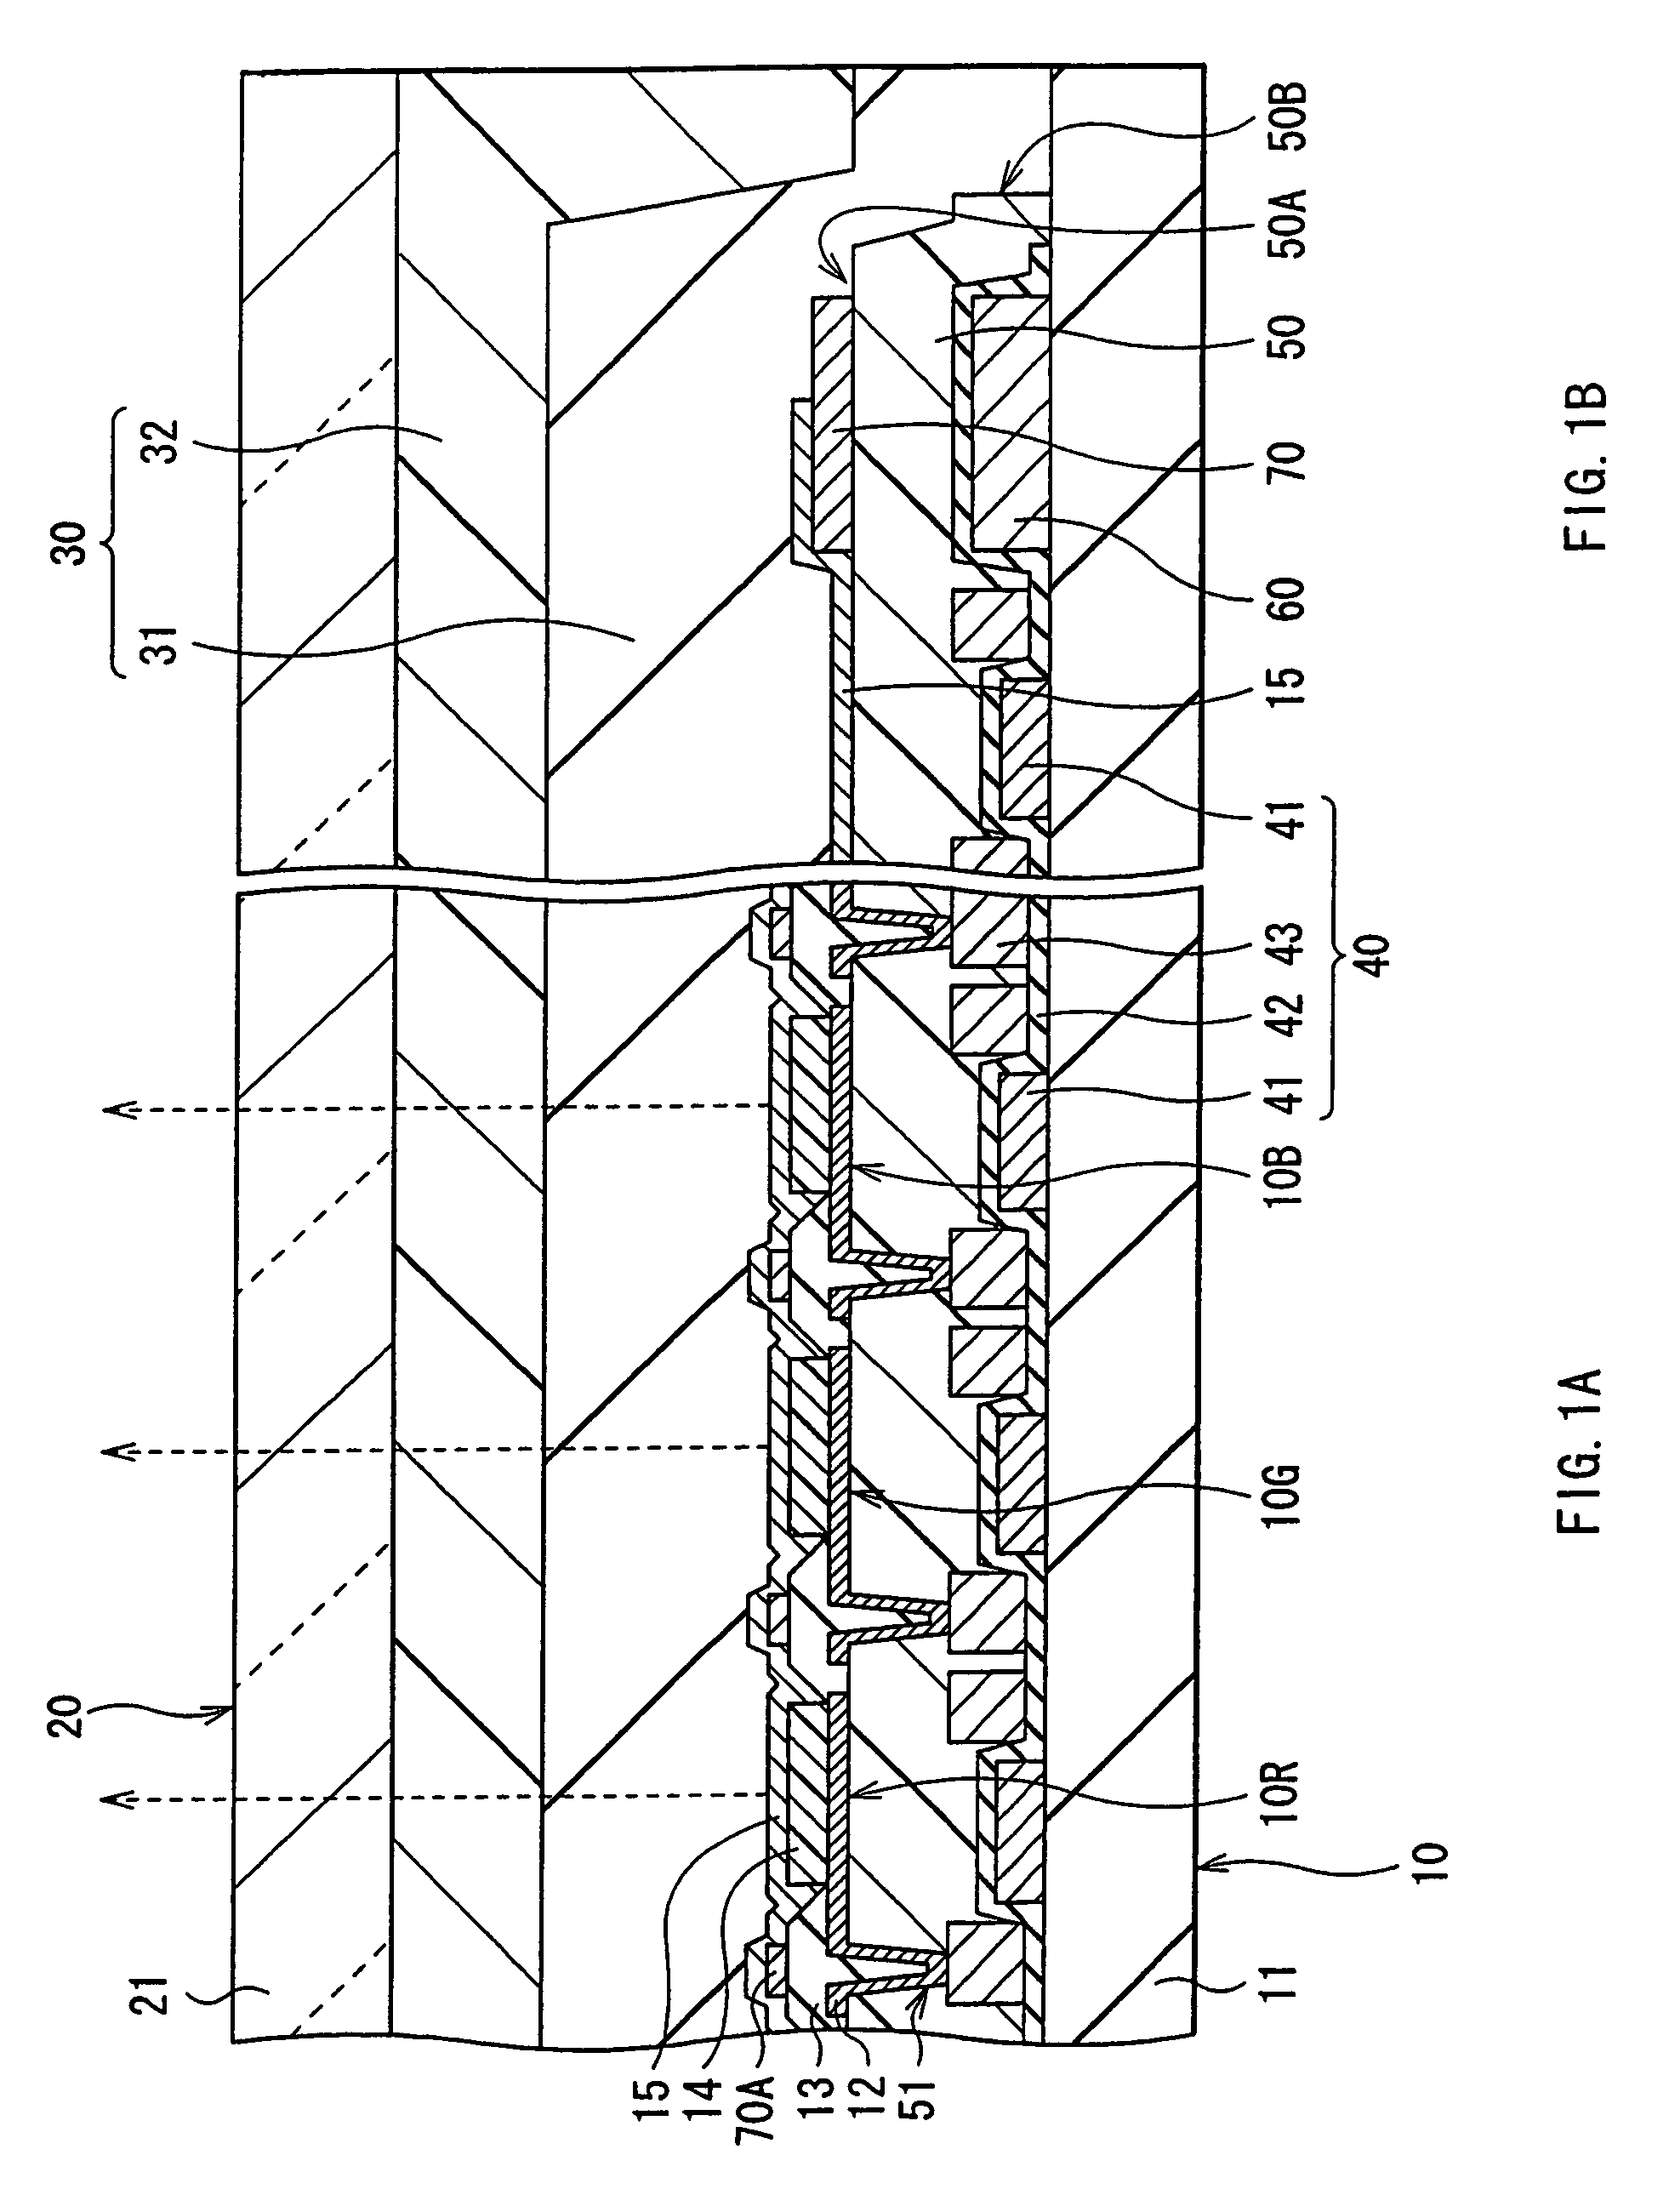 Display unit and method of manufacturing the same